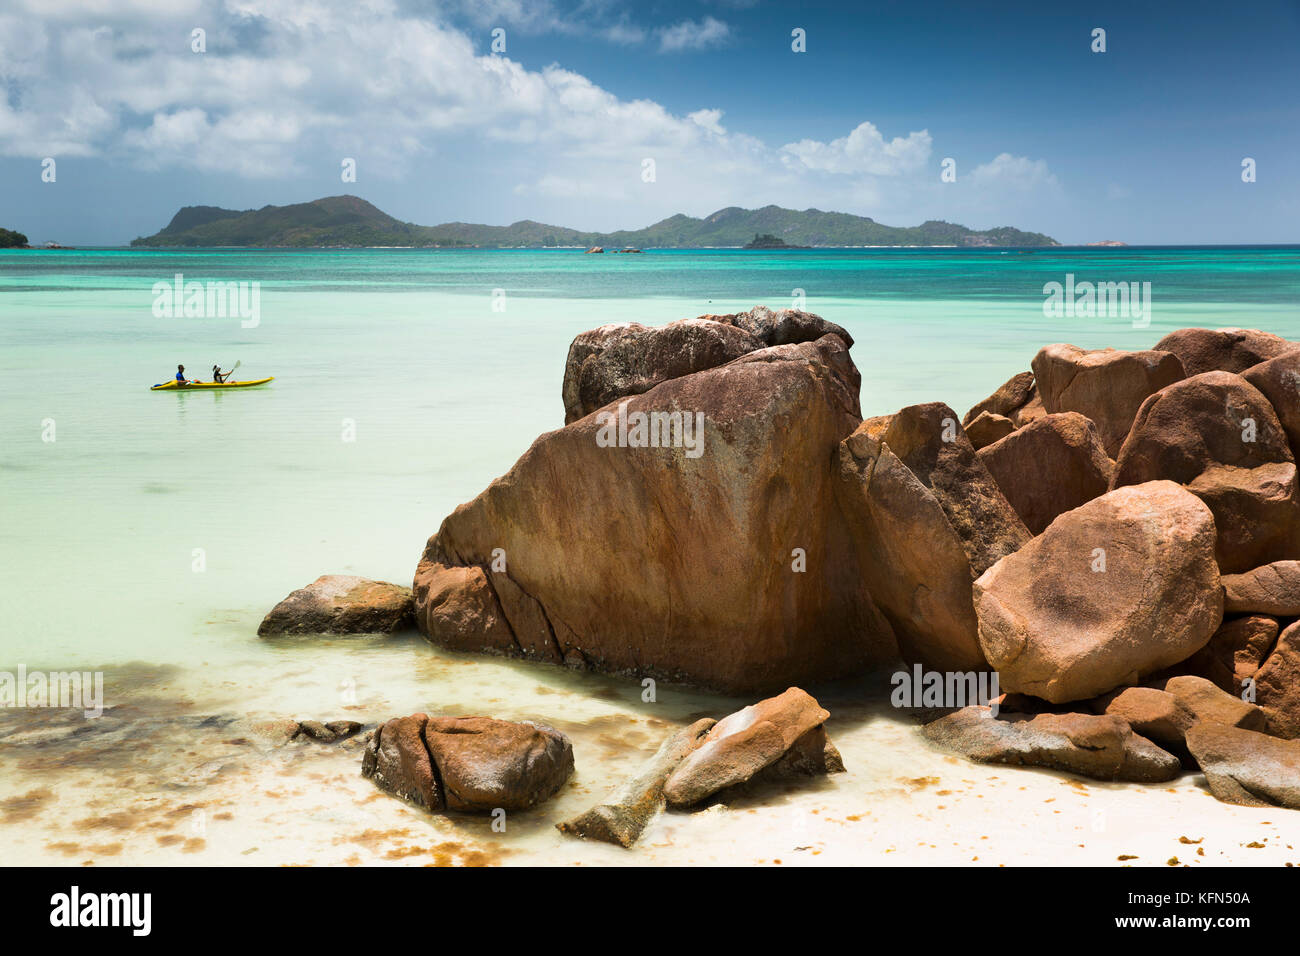 The Seychelles, Praslin, Anse Volbert, Cote d’Or beach couple in sea kayak at Anse Gouvernment Stock Photo